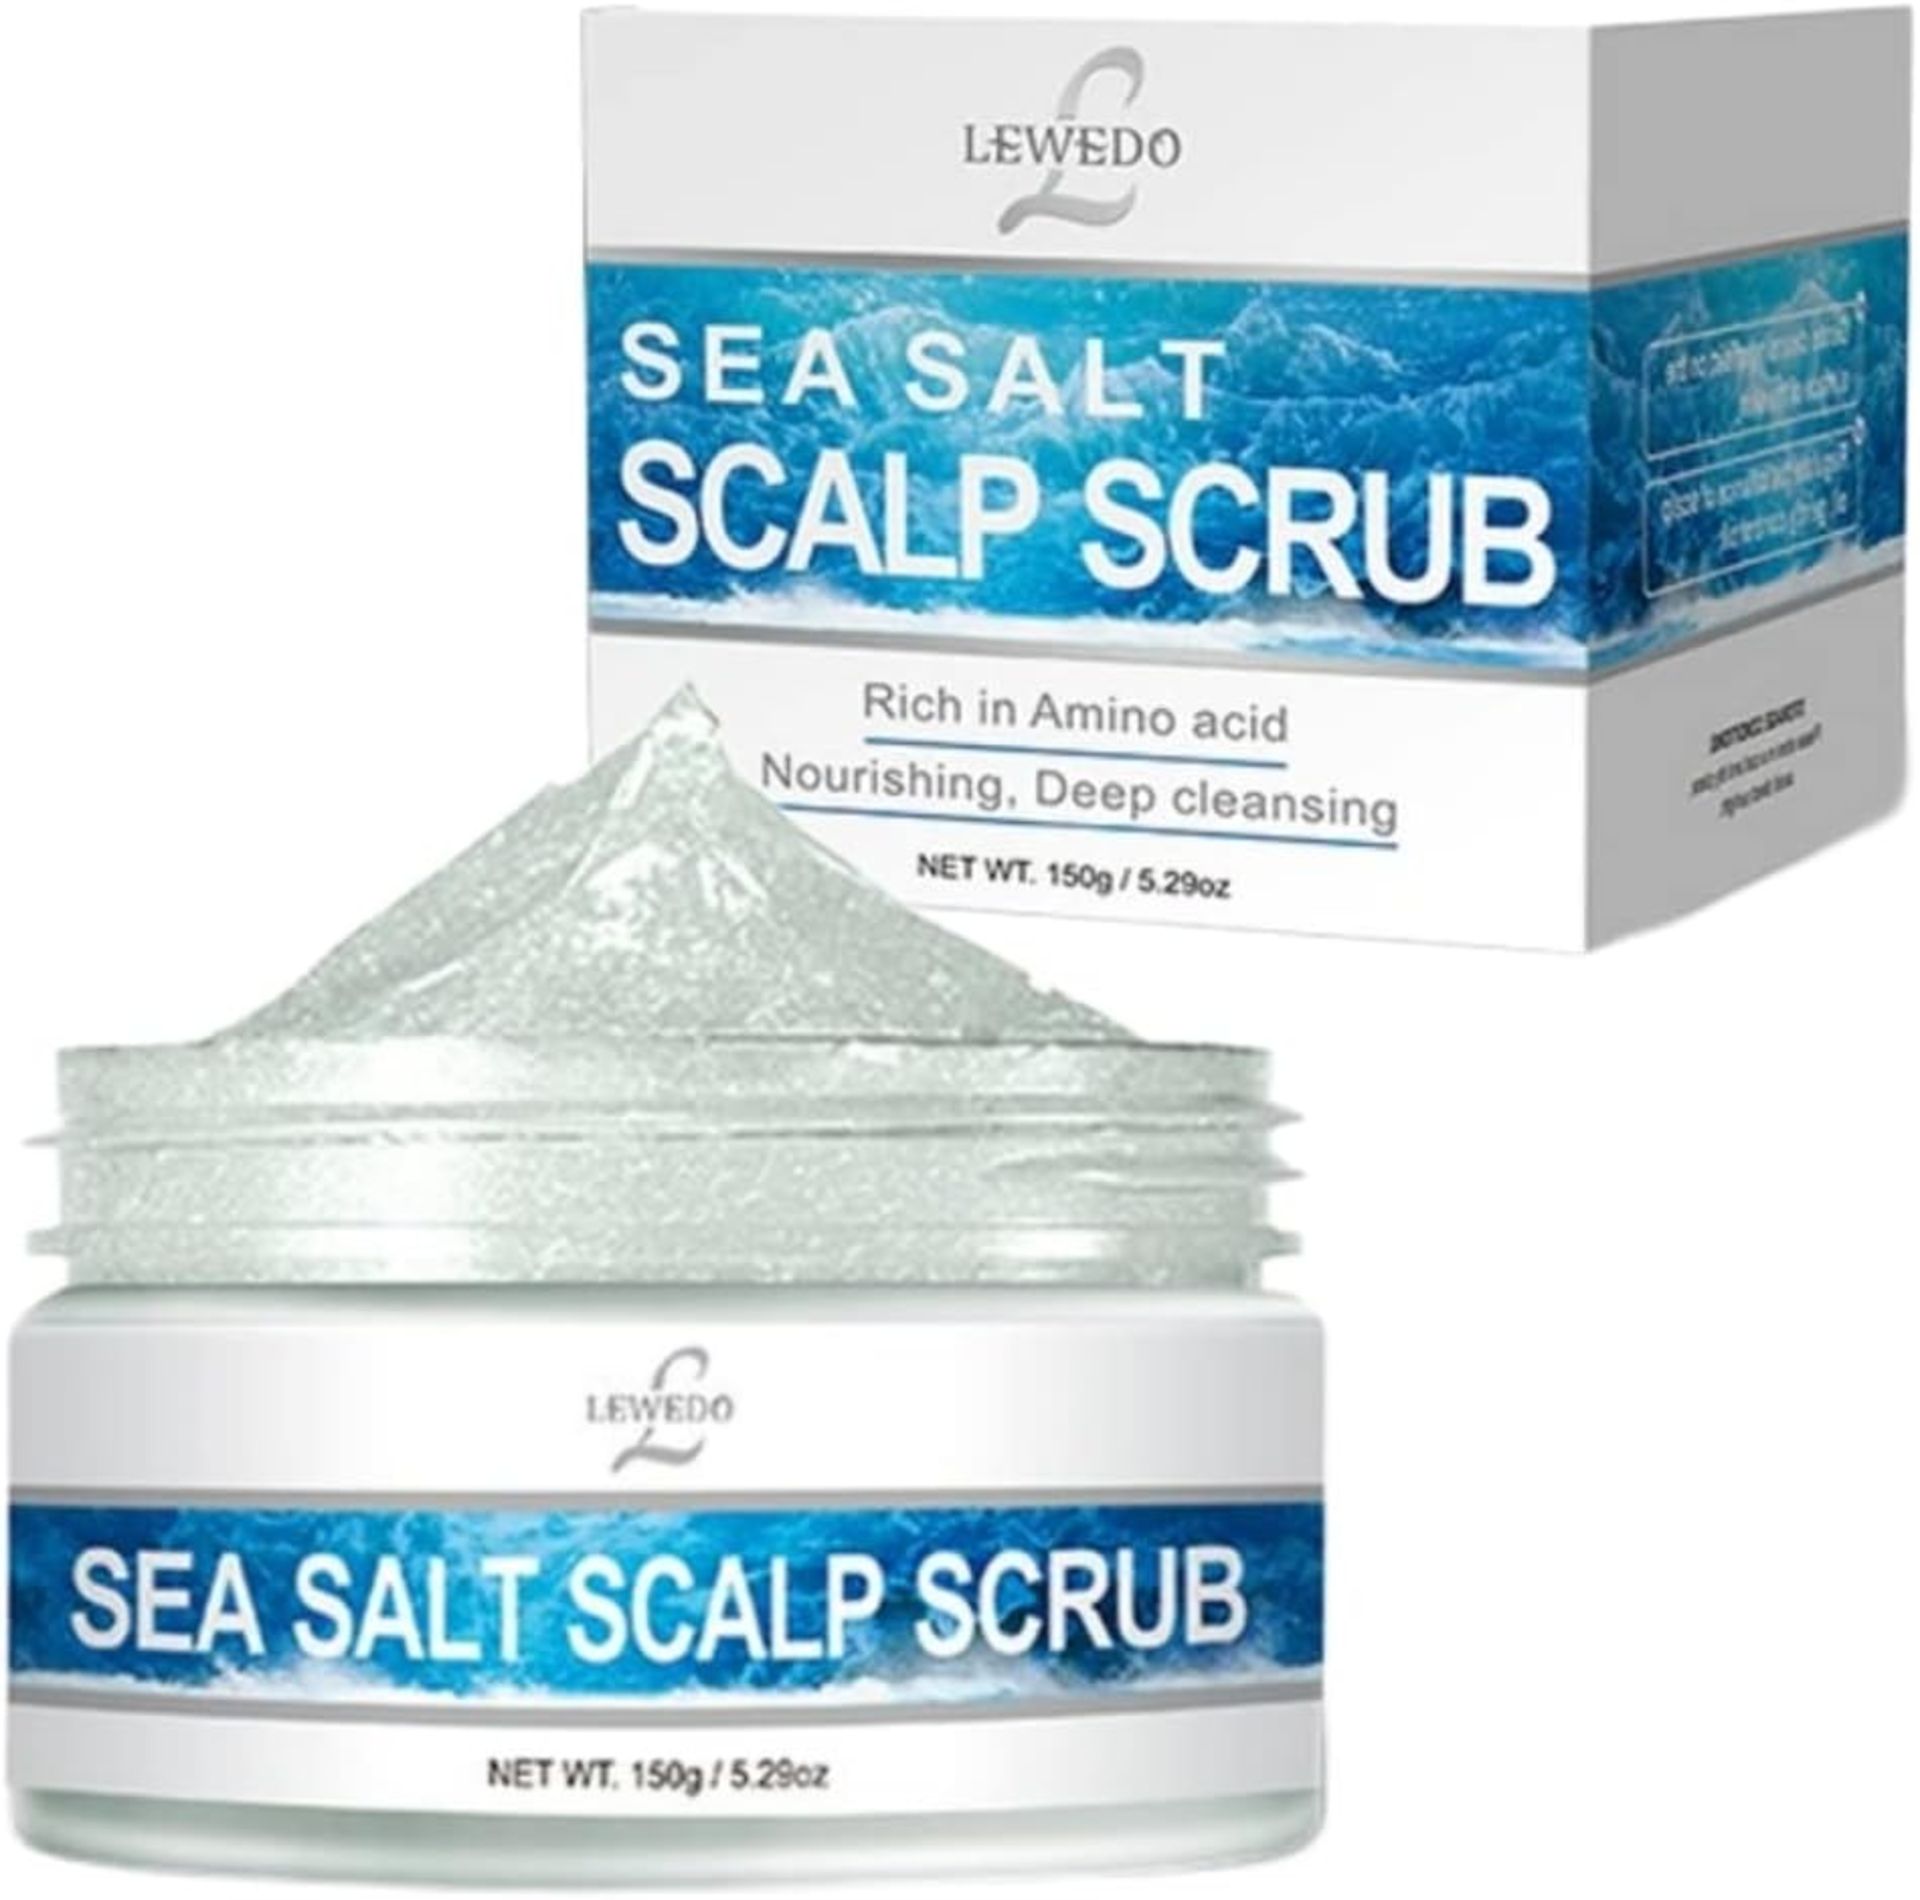 LEWEDO Exfoliating Scalp Scrub With Dead Sea Salt 150 g | Rich In Amino Acids | Nourishes and Dee... - Image 2 of 7